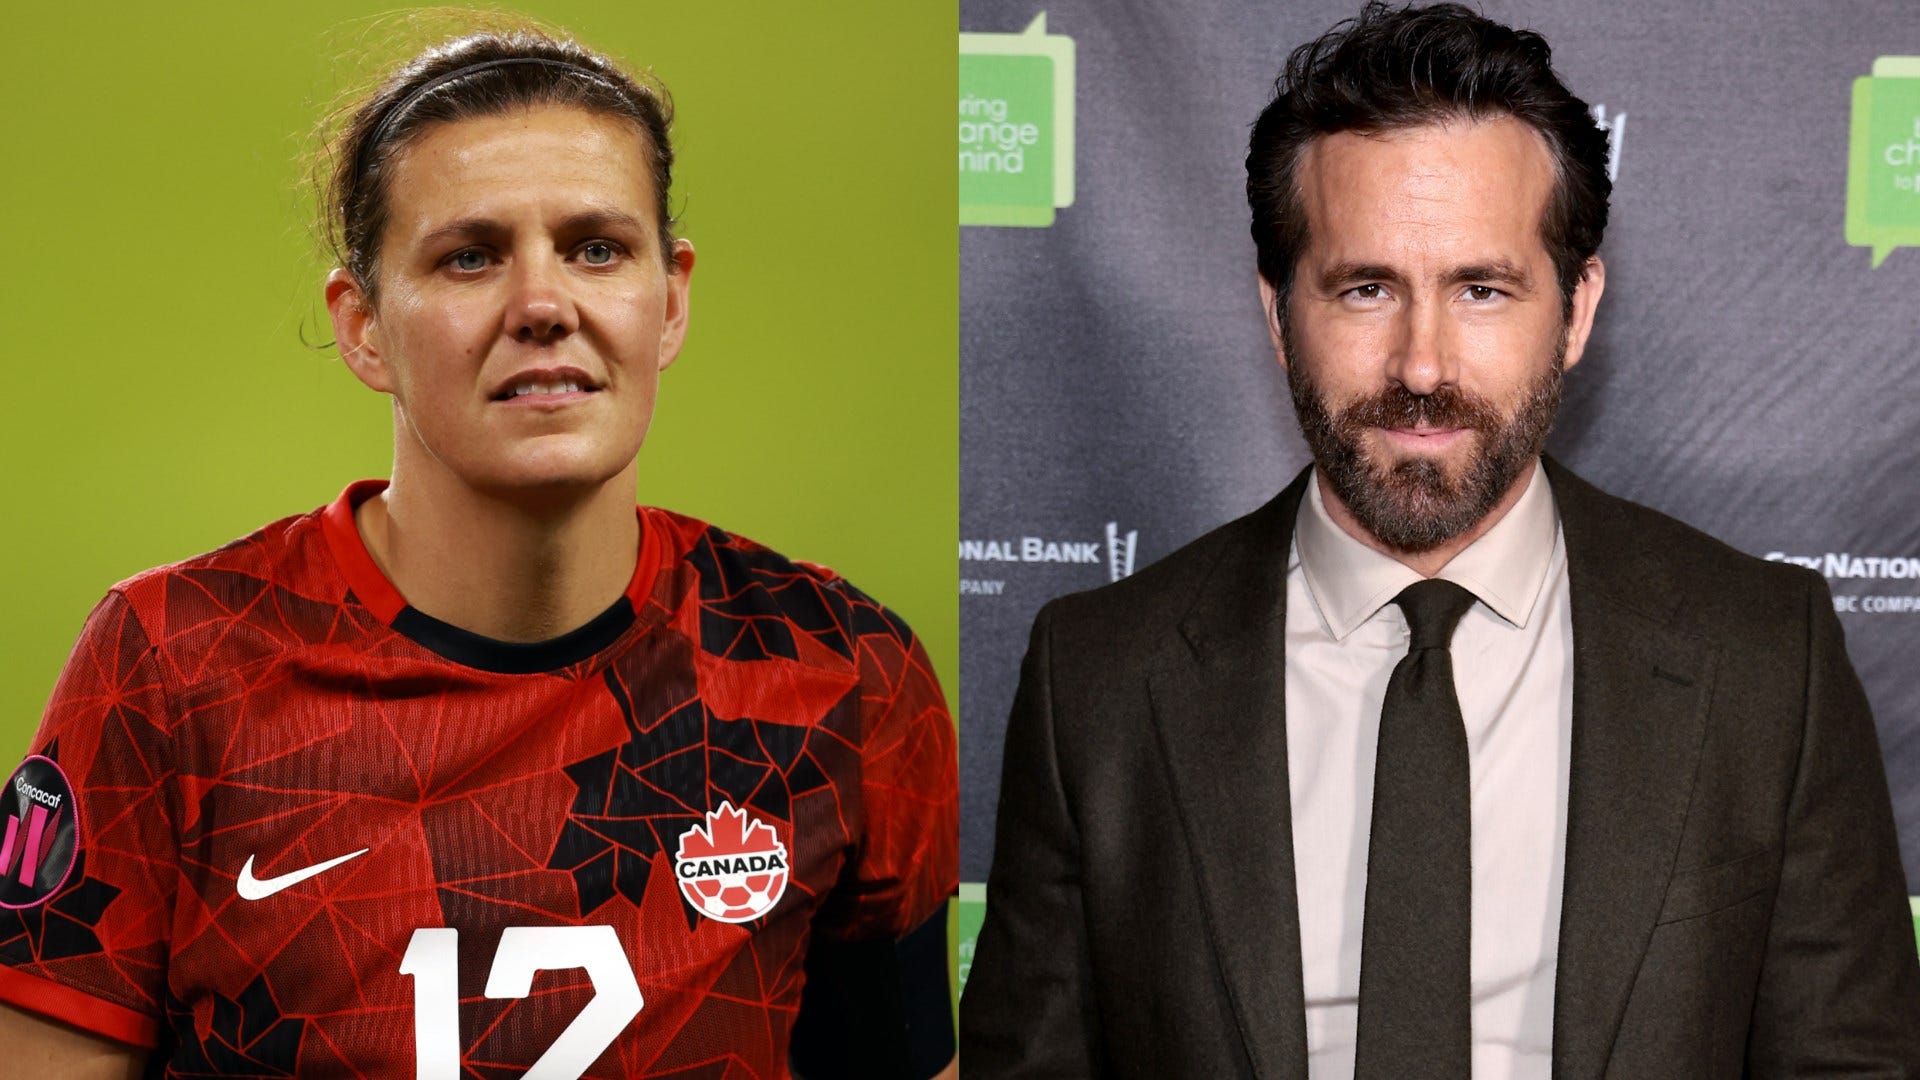 Ryan Reynolds making moves! Wrexham owner extends invite to Canada’s all-time leading goalscorer Christine Sinclair ahead of proposed retirement plans